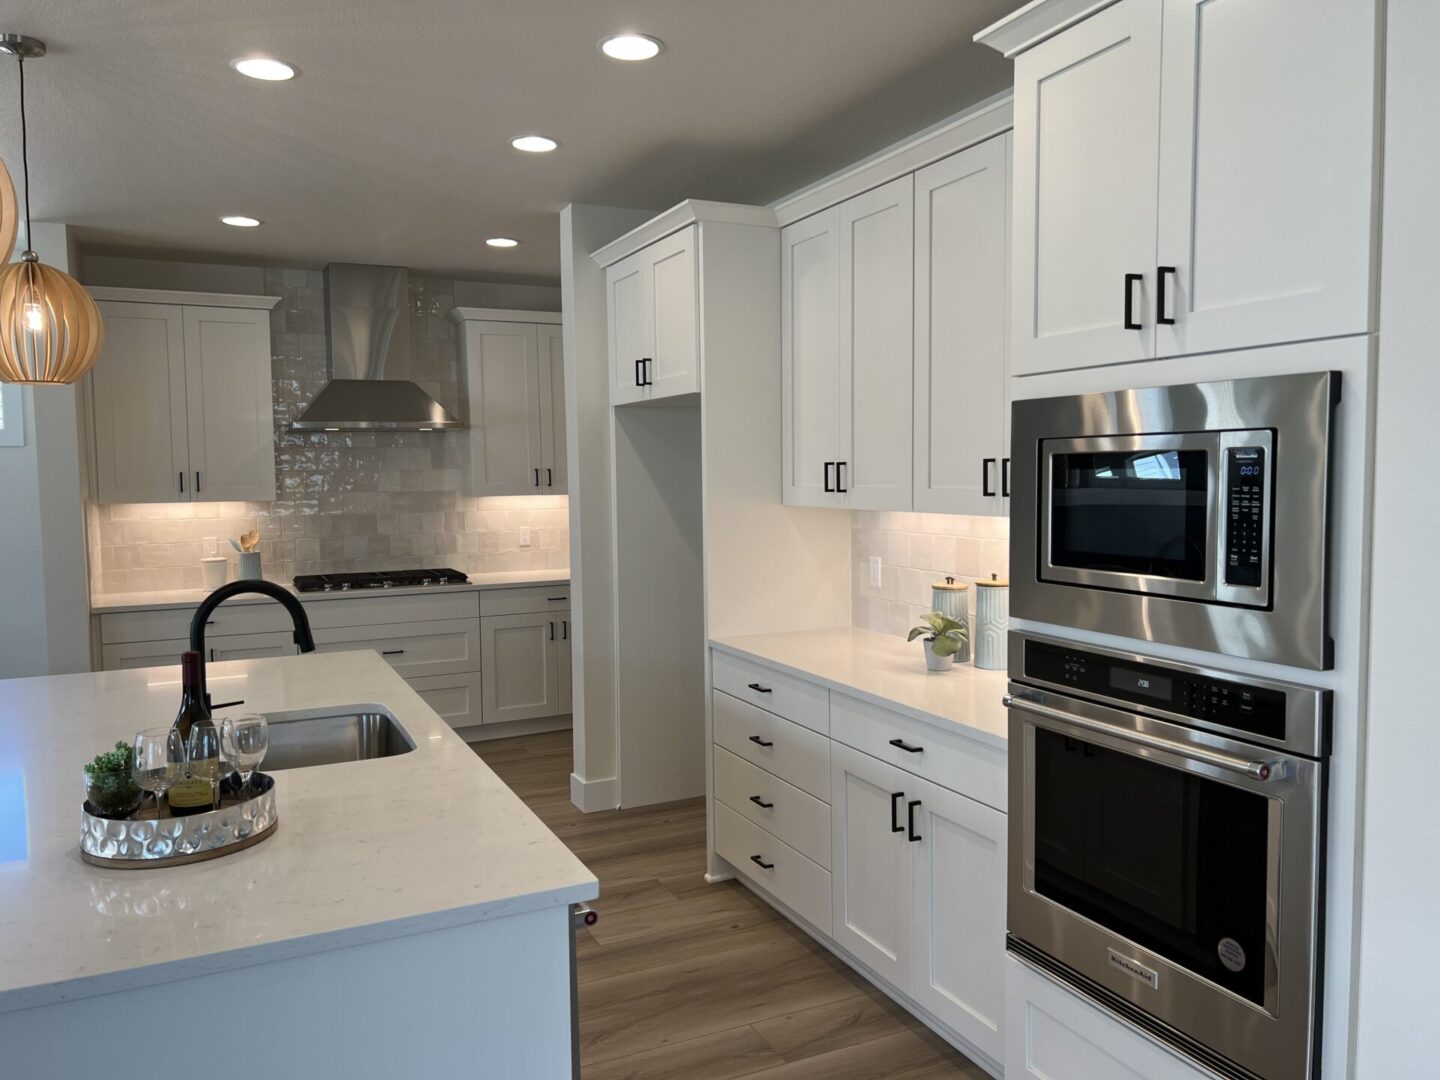 A kitchen with white cabinets and white counters.